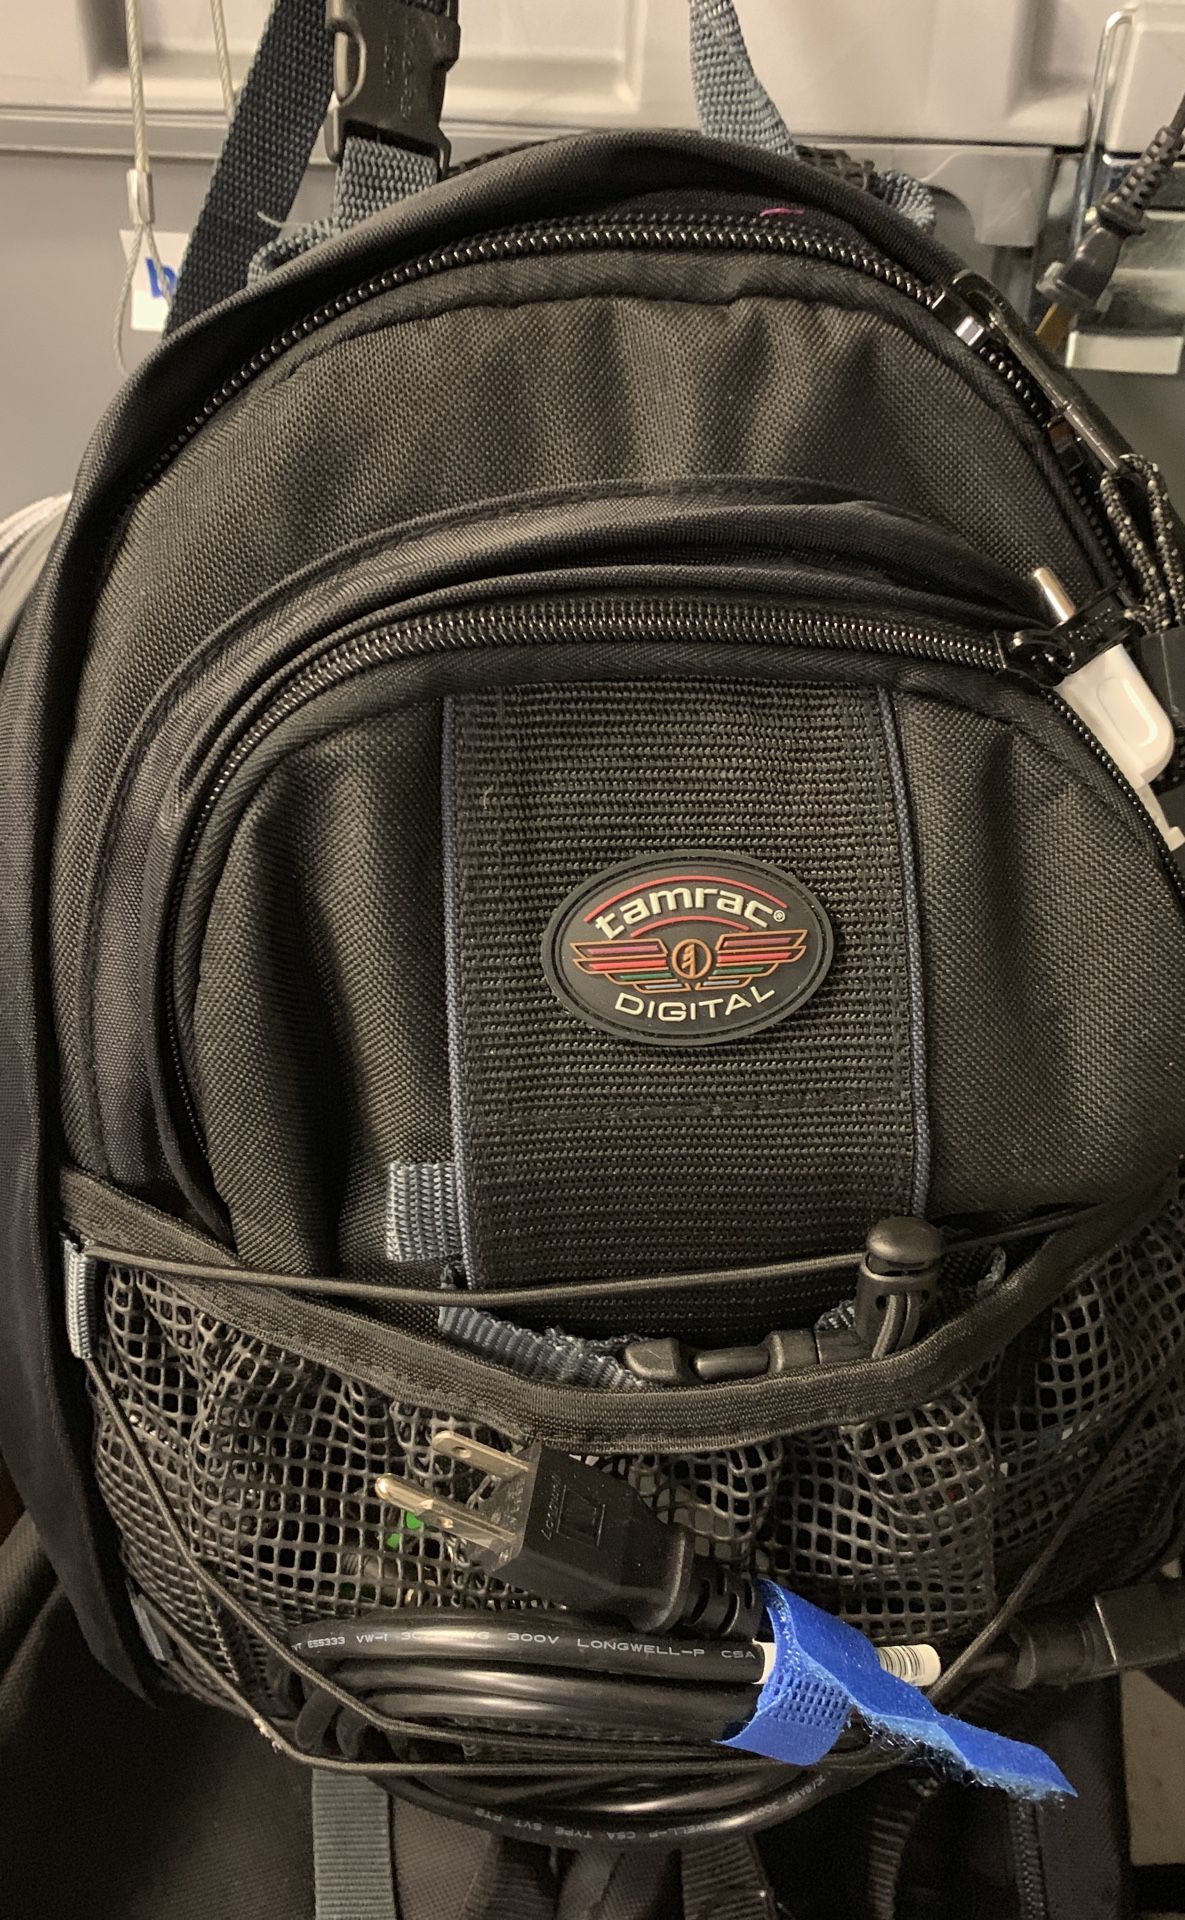 Professional bag for video equipment